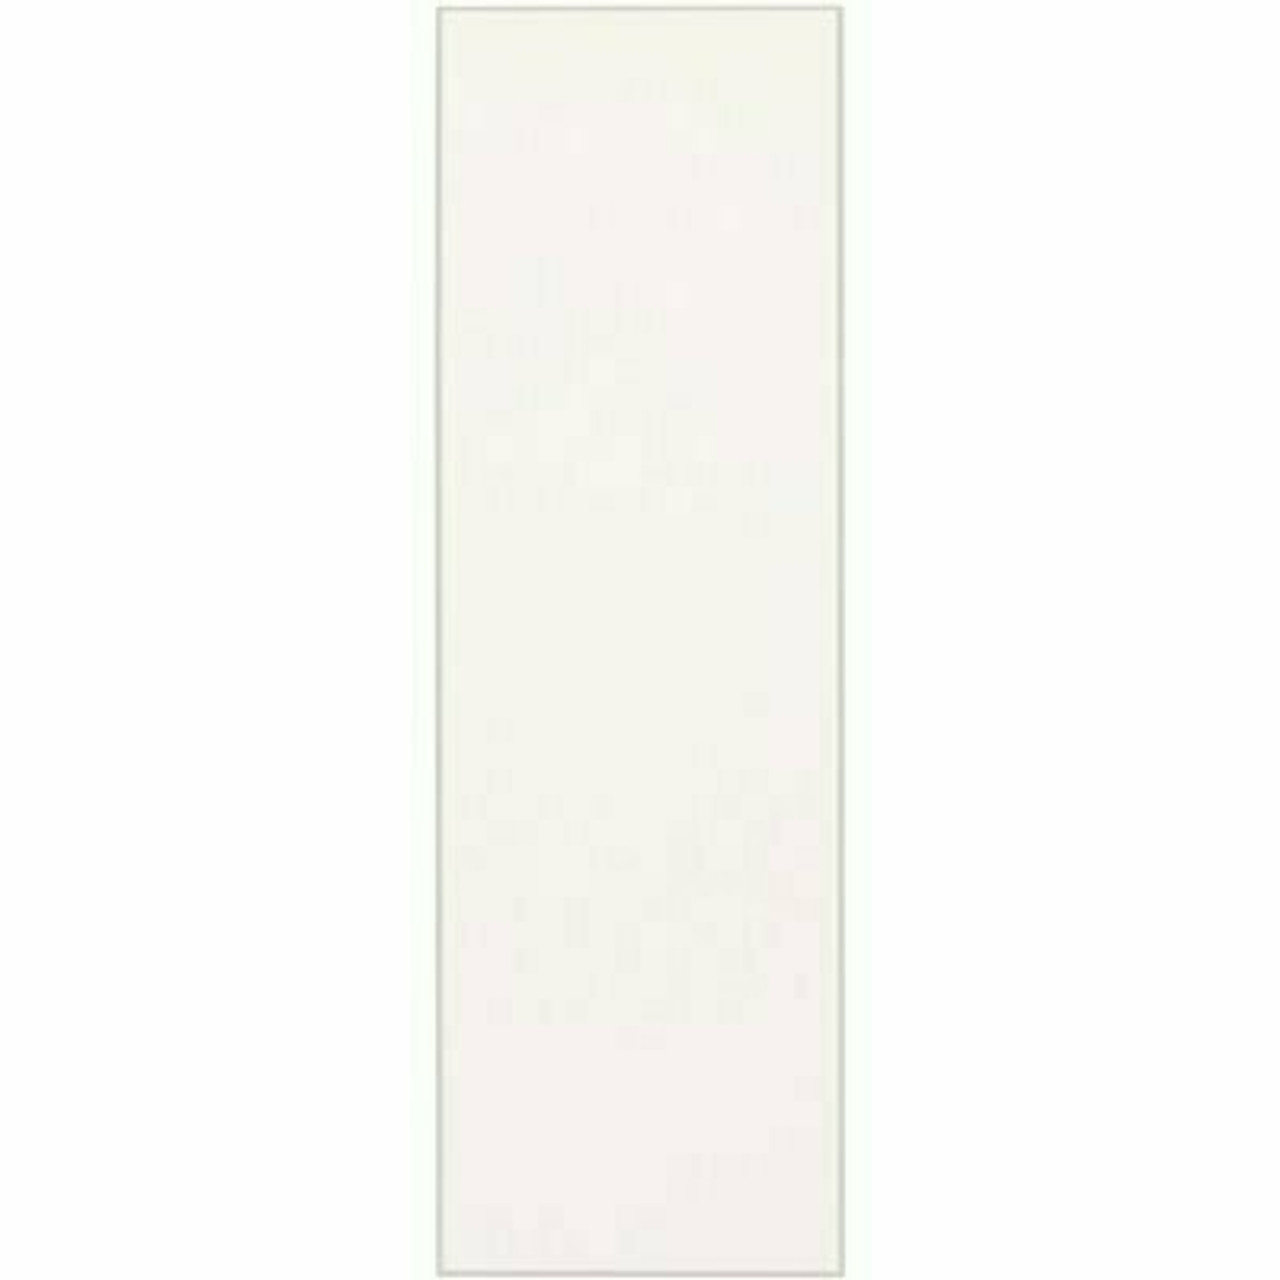 Hampton Bay 0.1875X36X11.25 in. Cabinet End Panel In Satin White (2-Pack)